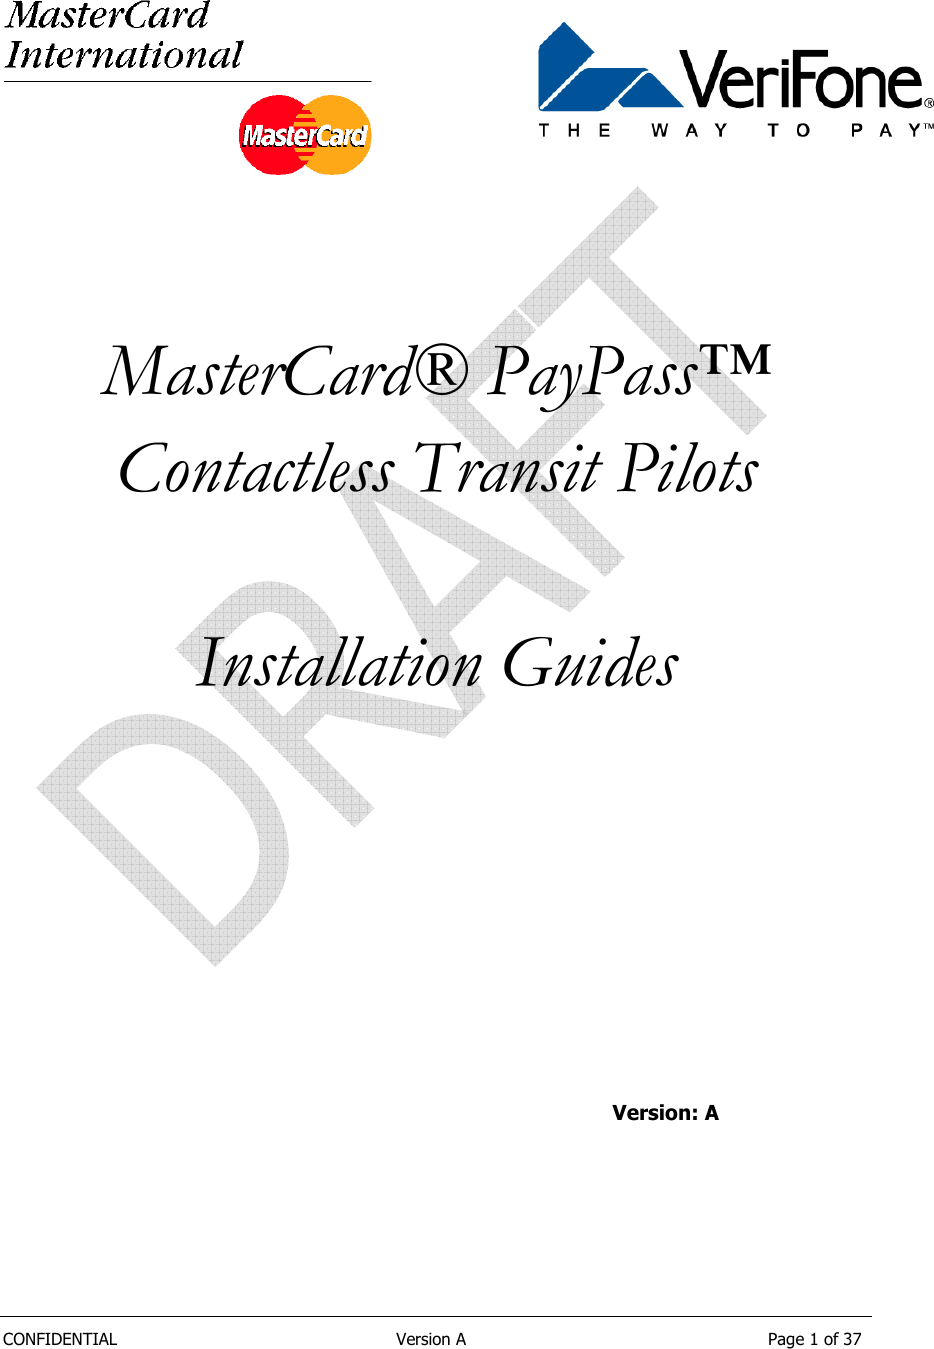   CONFIDENTIAL  Version A  Page 1 of 37        MasterCard® PayPass™  Contactless Transit Pilots  Installation Guides           Version: A   